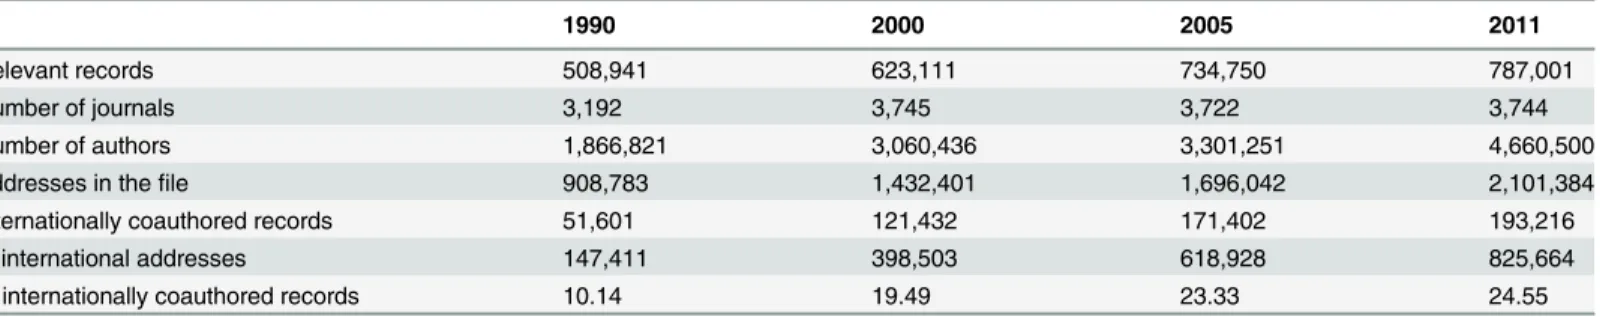 Table 1. Data on international collaborative research papers, 1990, 2000, 2005, and 2011.